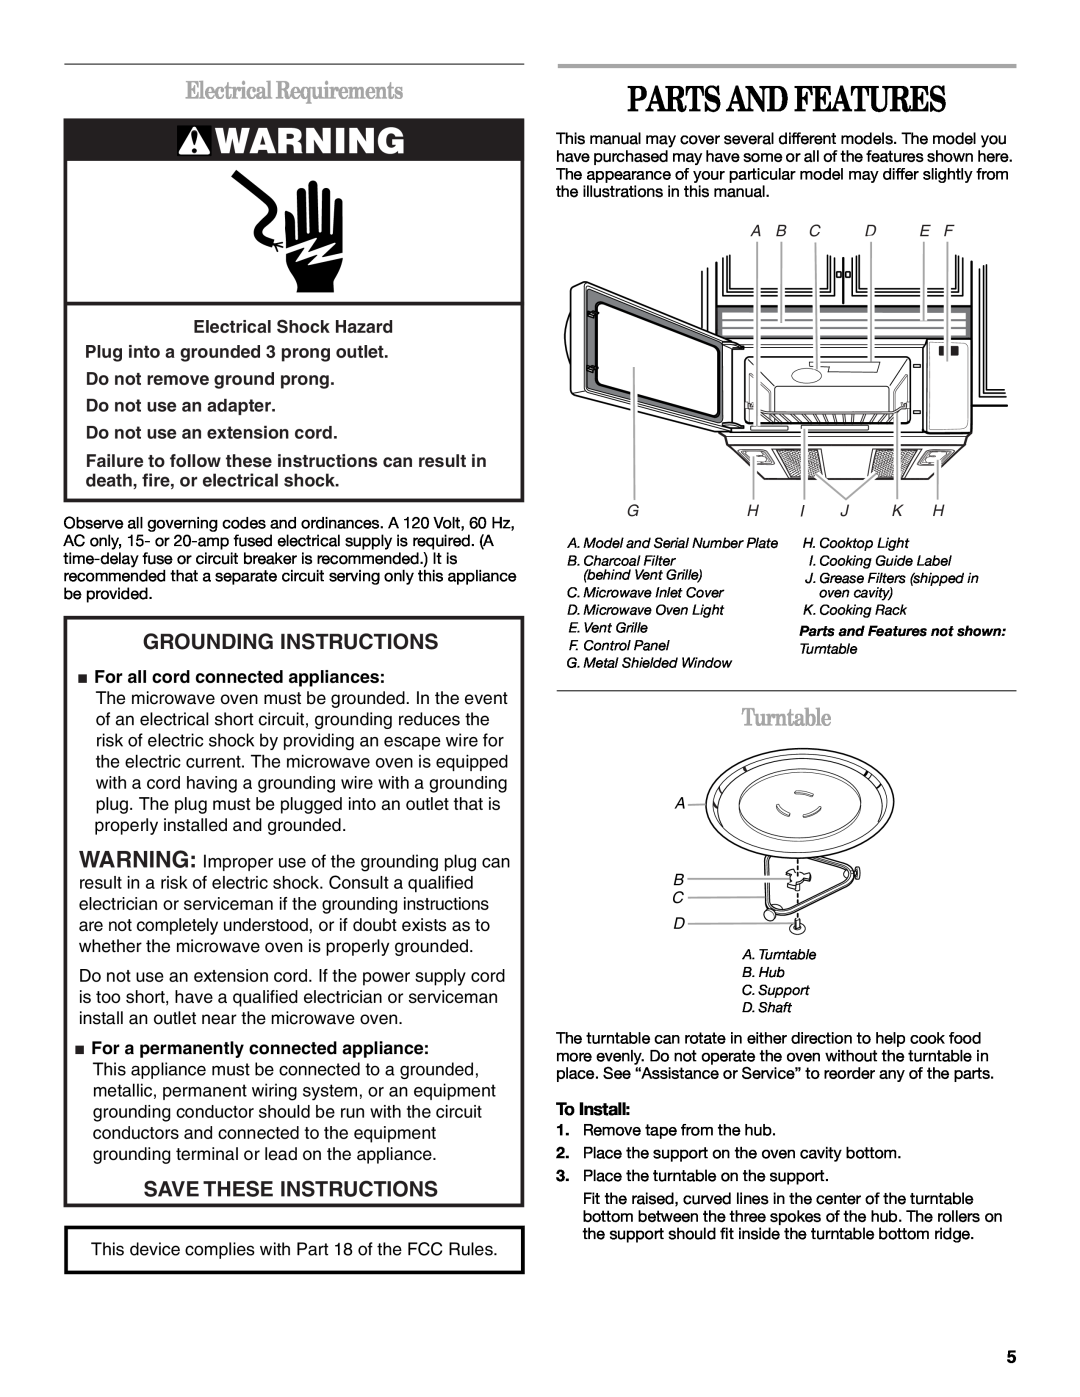 Whirlpool MH3184XP Parts And Features, Electrical Requirements, Turntable, Grounding Instructions, Save These Instructions 